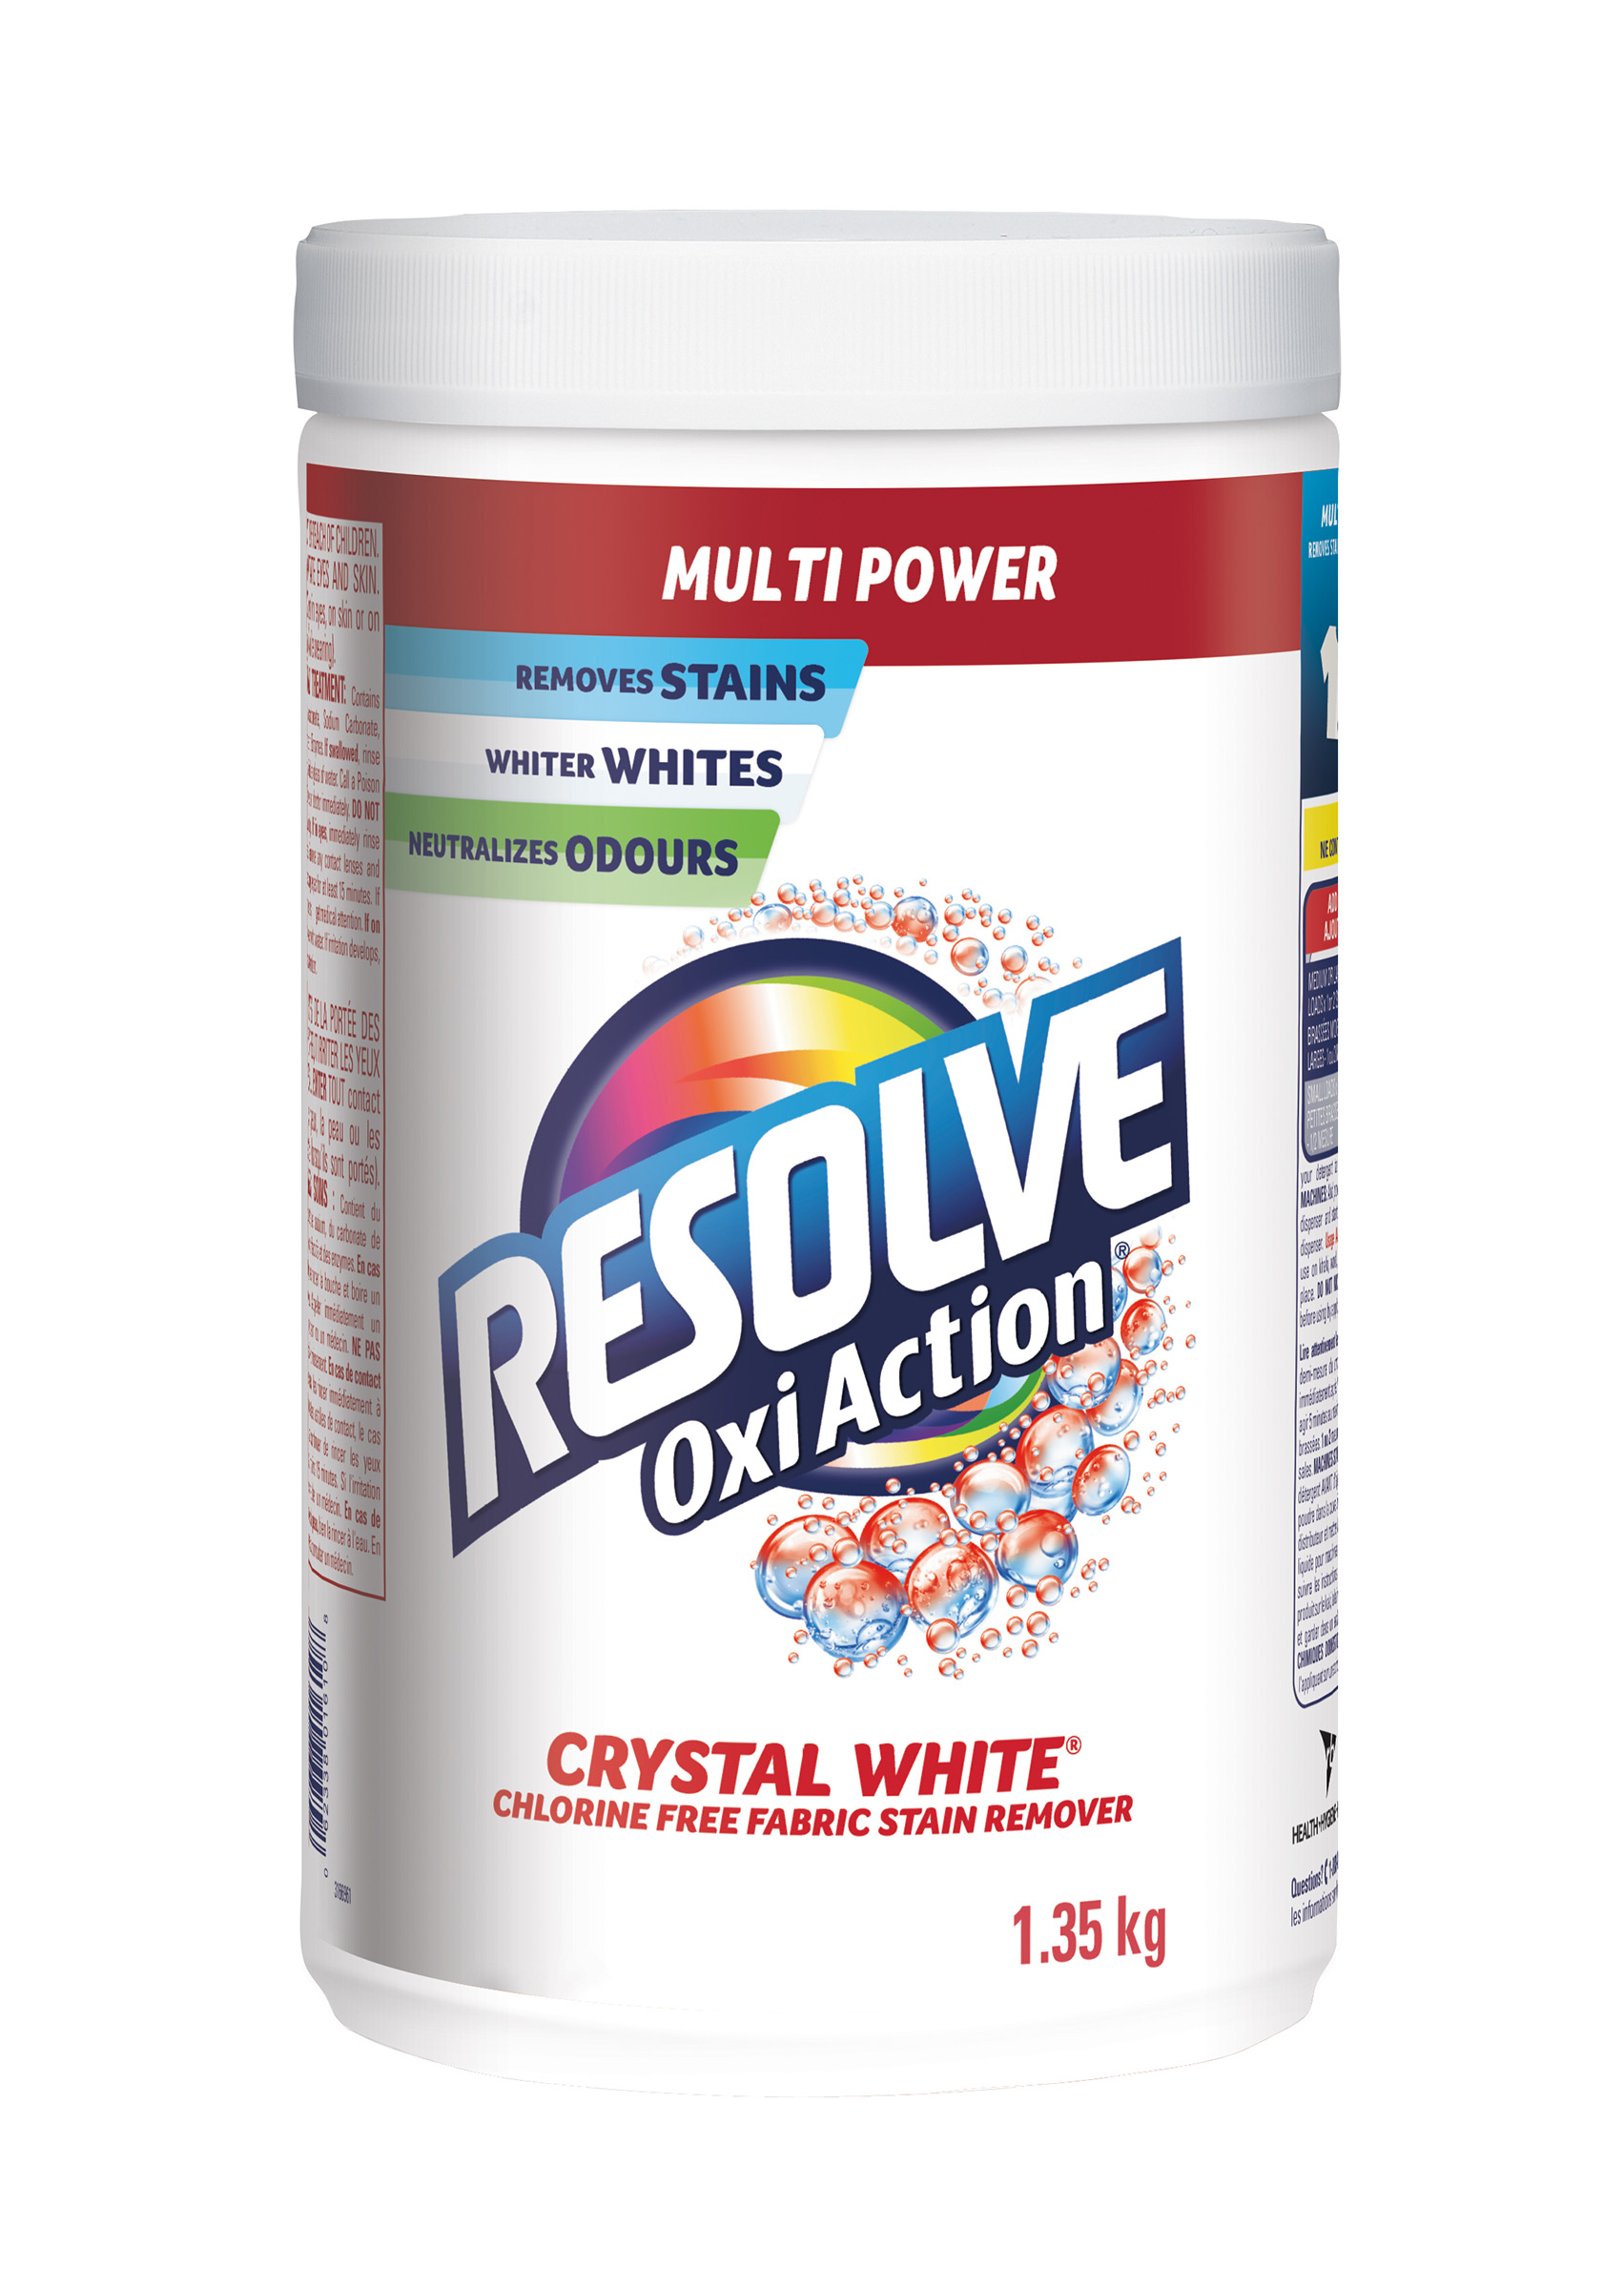 Resolve Spray 'N Wash, Laundry Stain Remover, Mega Value Refill